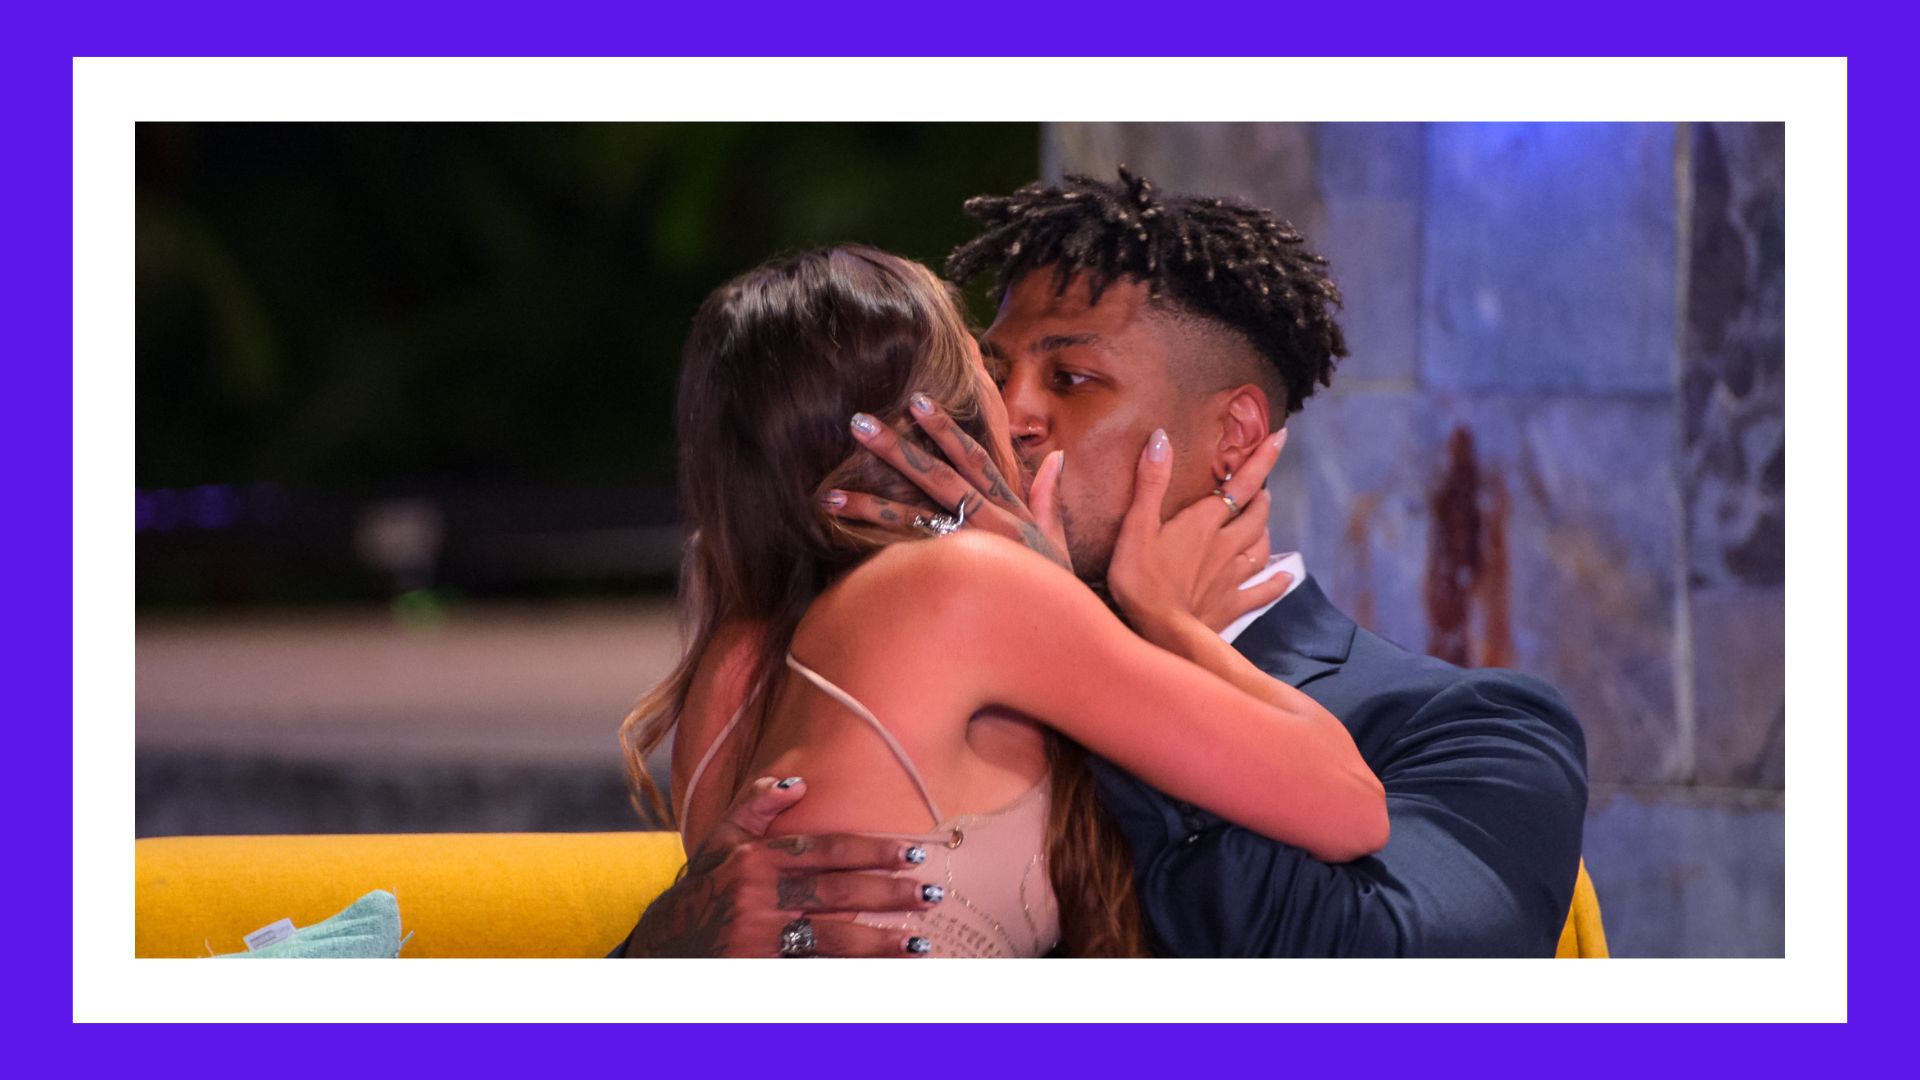 Are The Perfect Match Winners Still Together? Here's What Georgia Hassarati  And Dom Gabriel Say About Their Relationship After The Finale